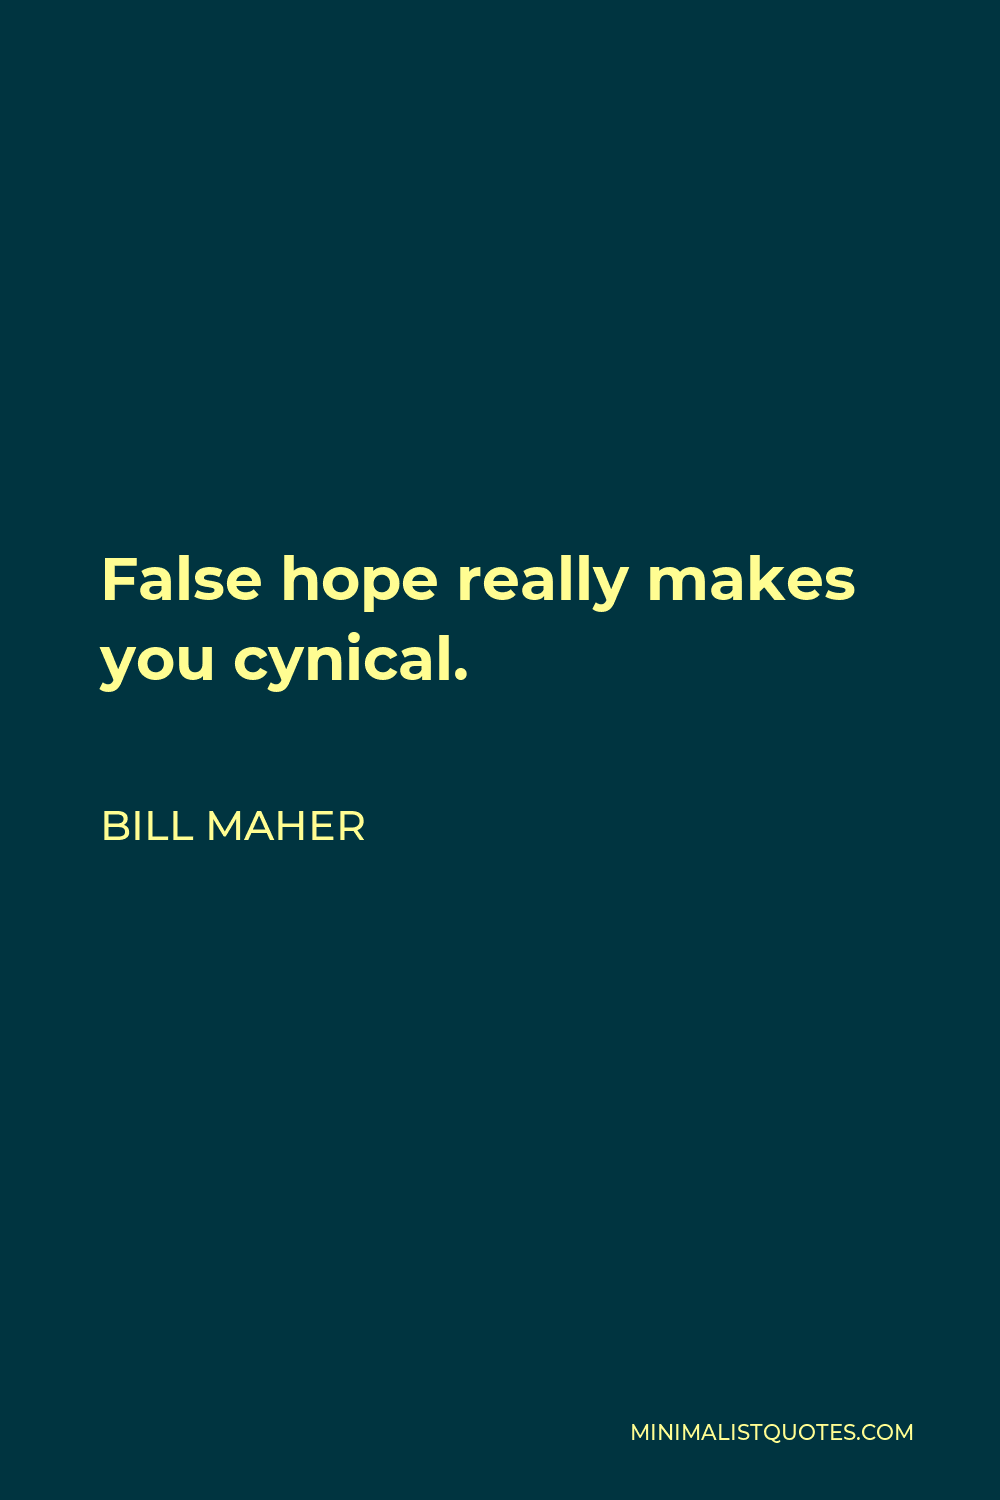 Bill Maher Quote - False hope really makes you cynical.